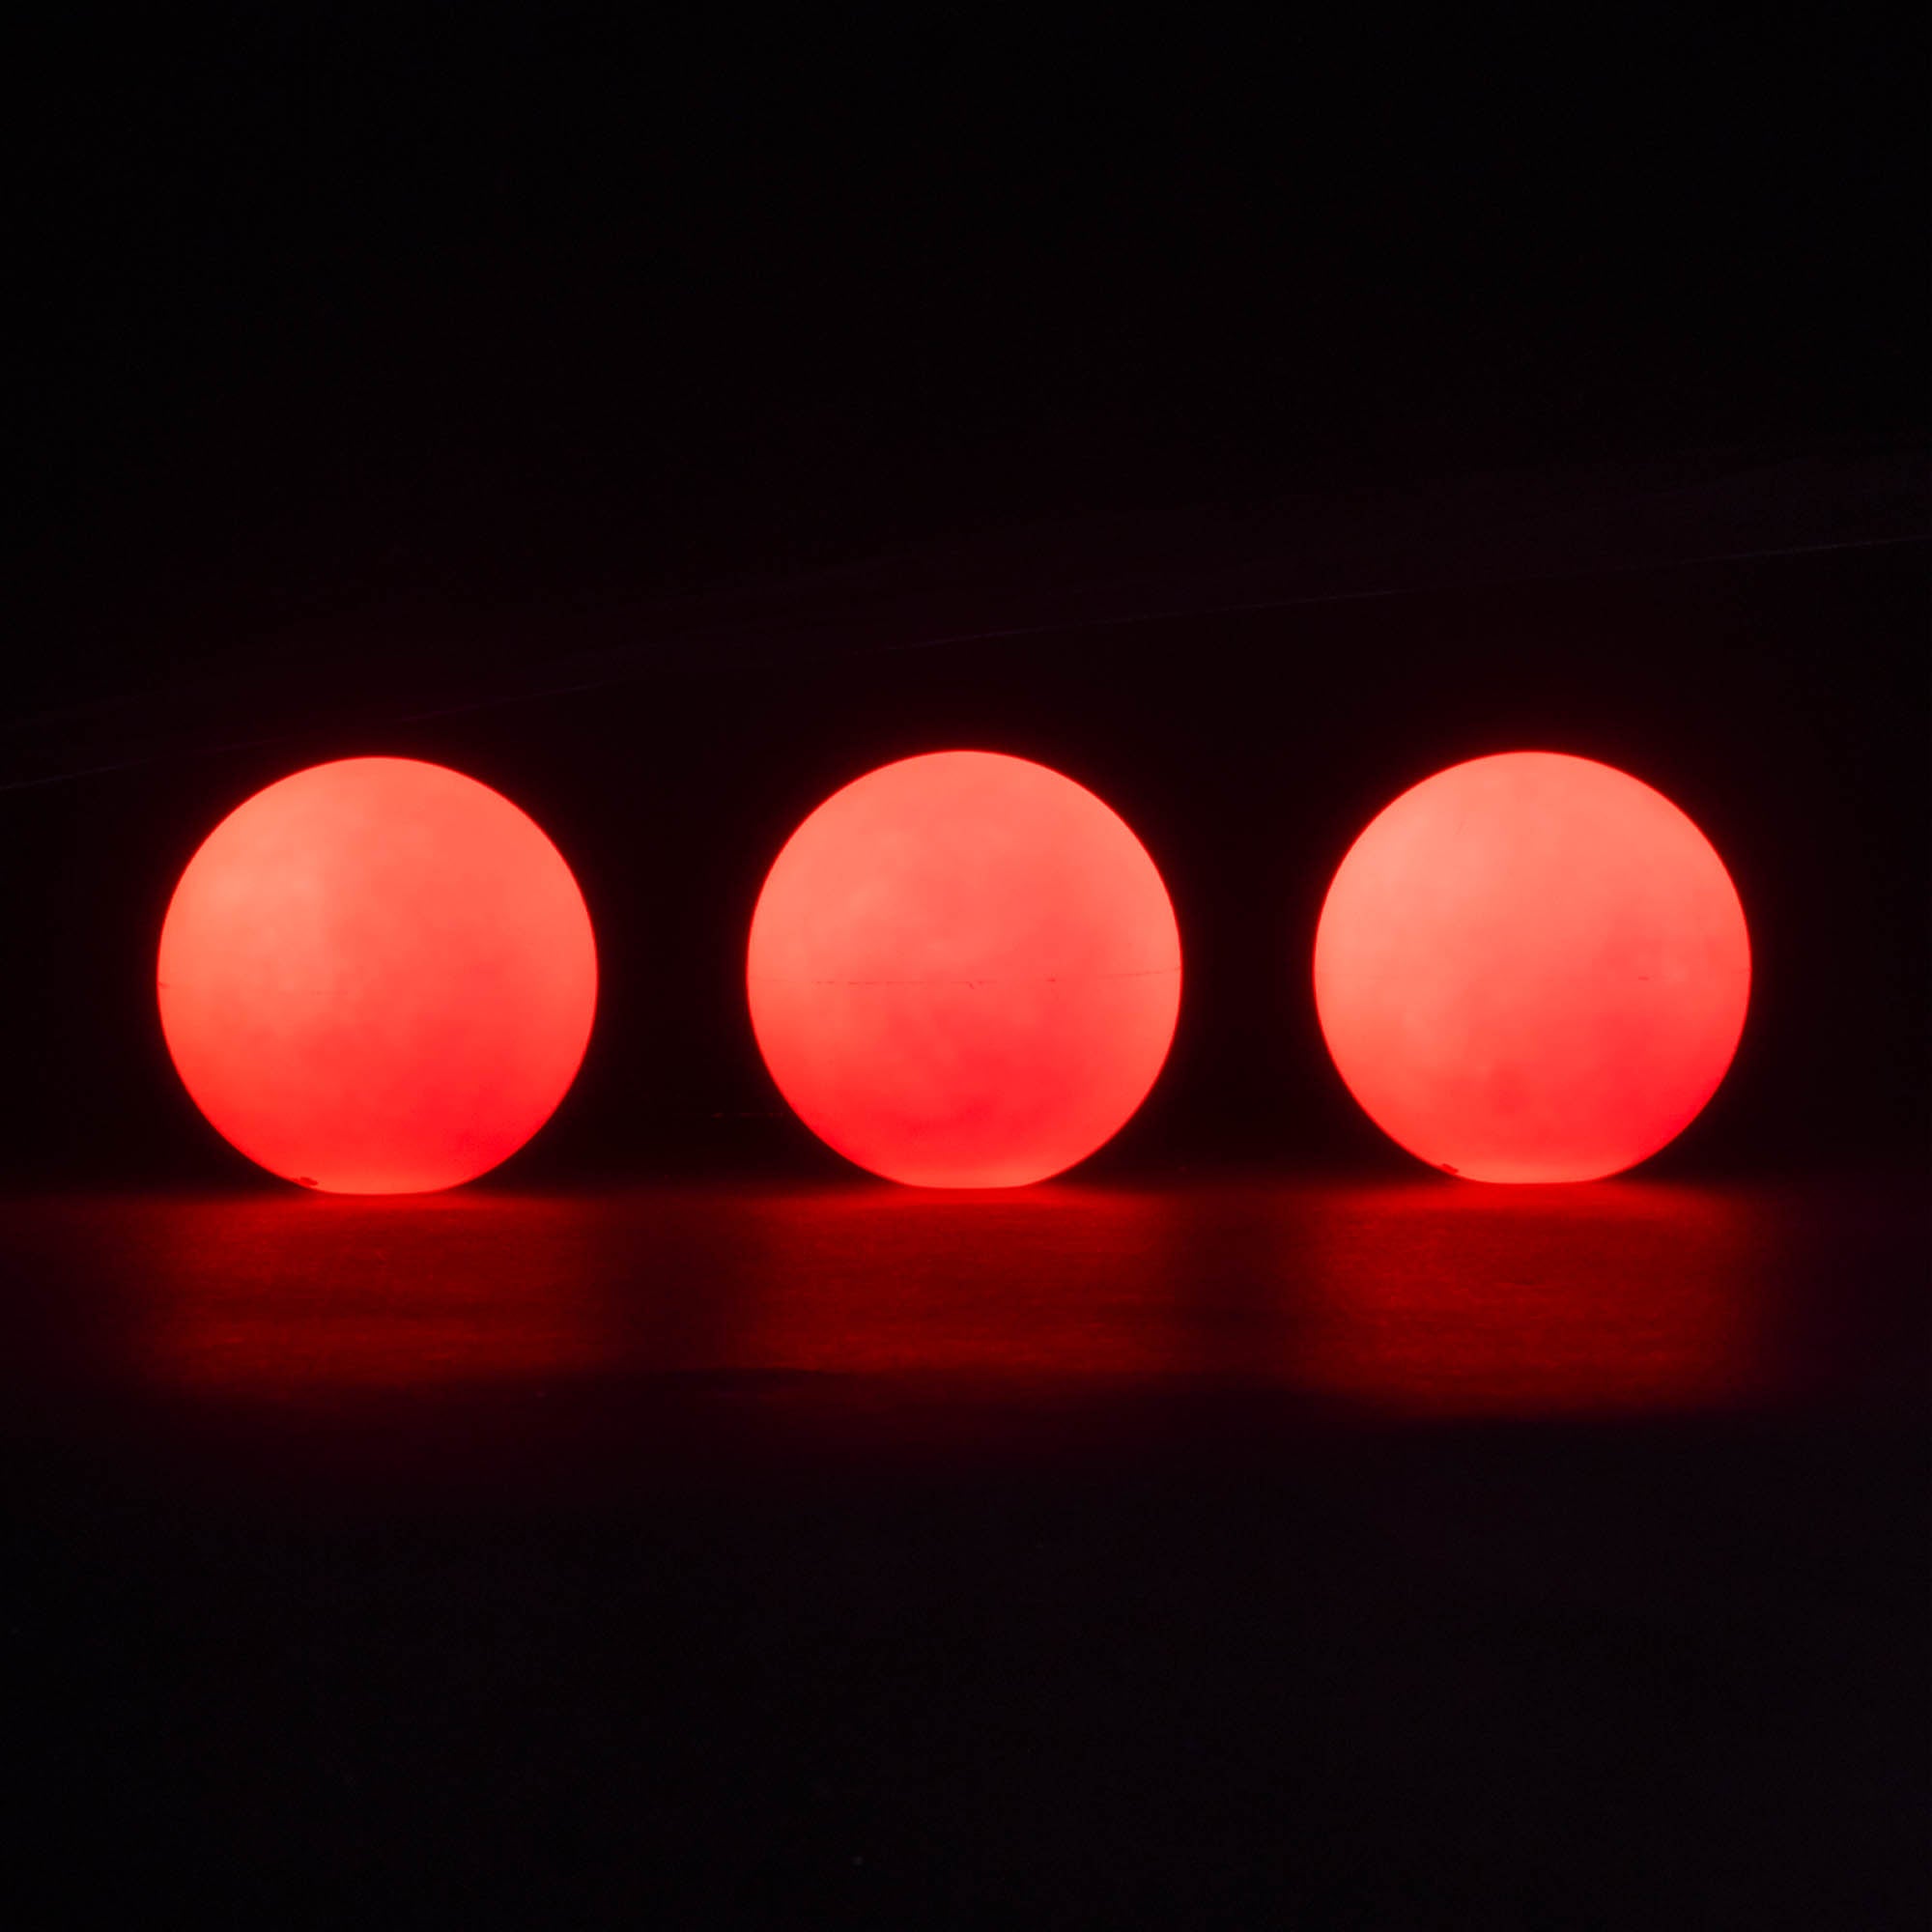 3 balls in a line glowing red